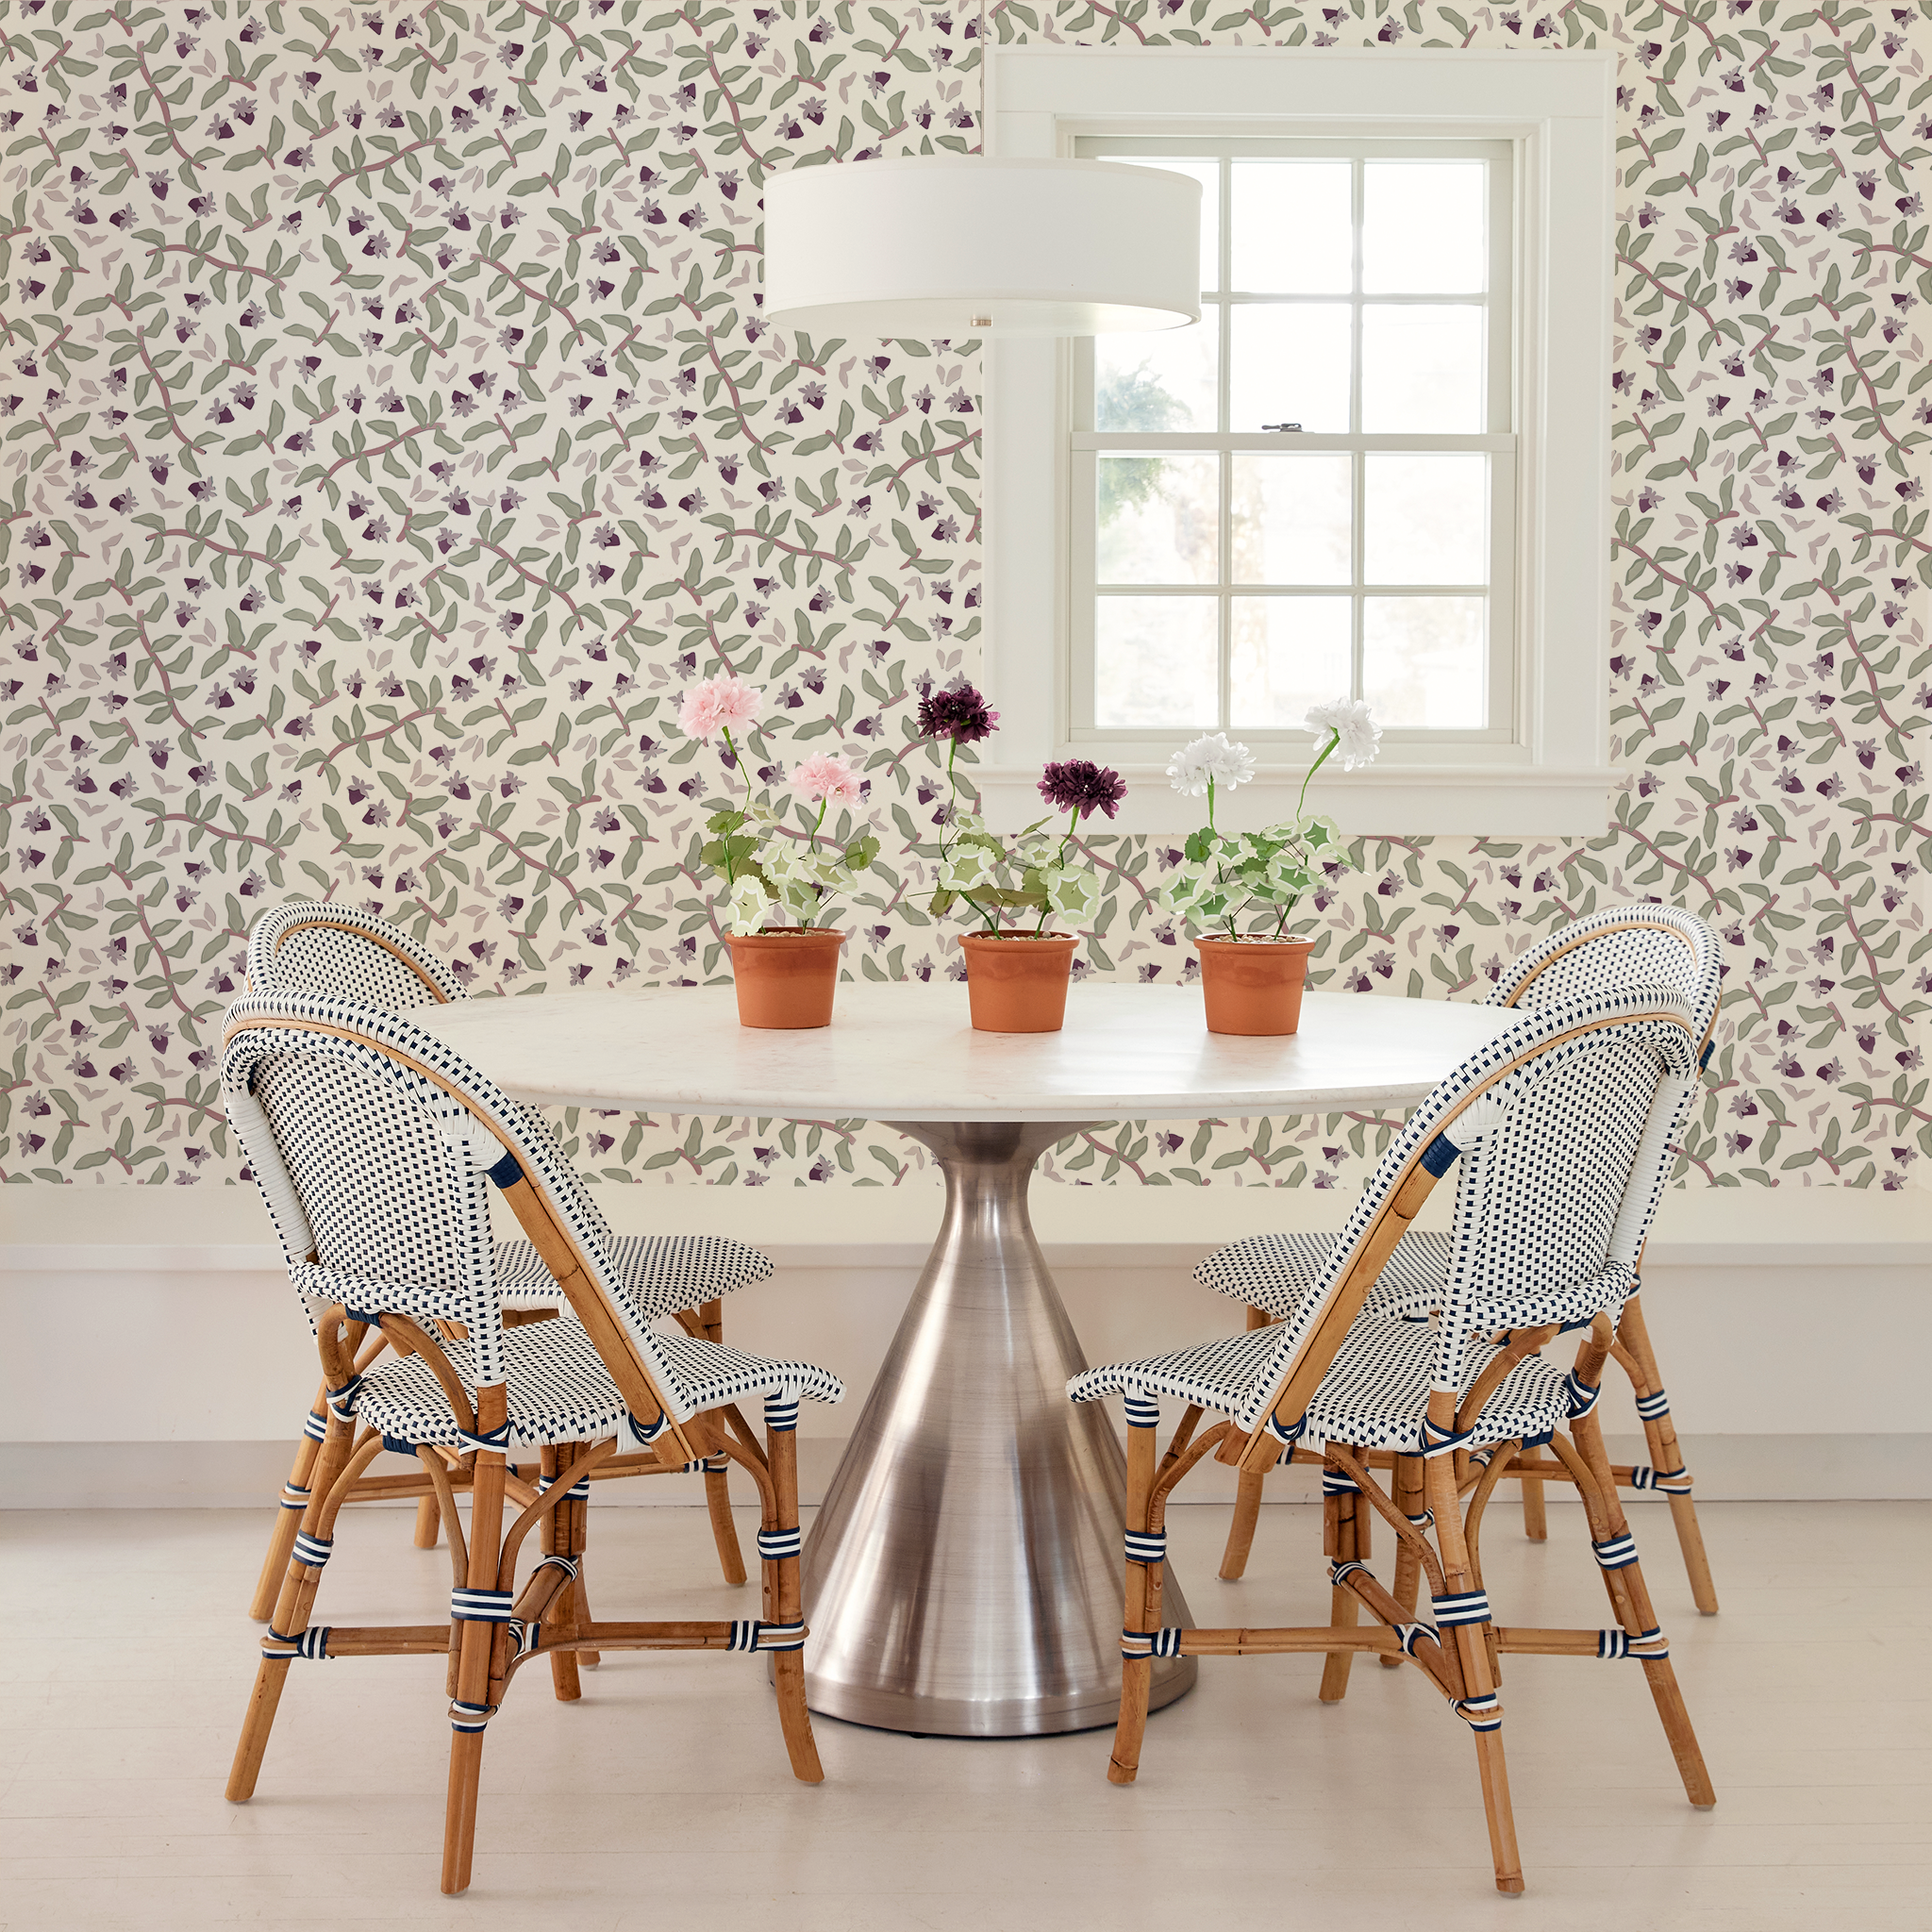 Round white table styled with three flower clay pots and four wooden chairs around next to Strawberry & Botanical Printed Wallpaper by small rectangular window